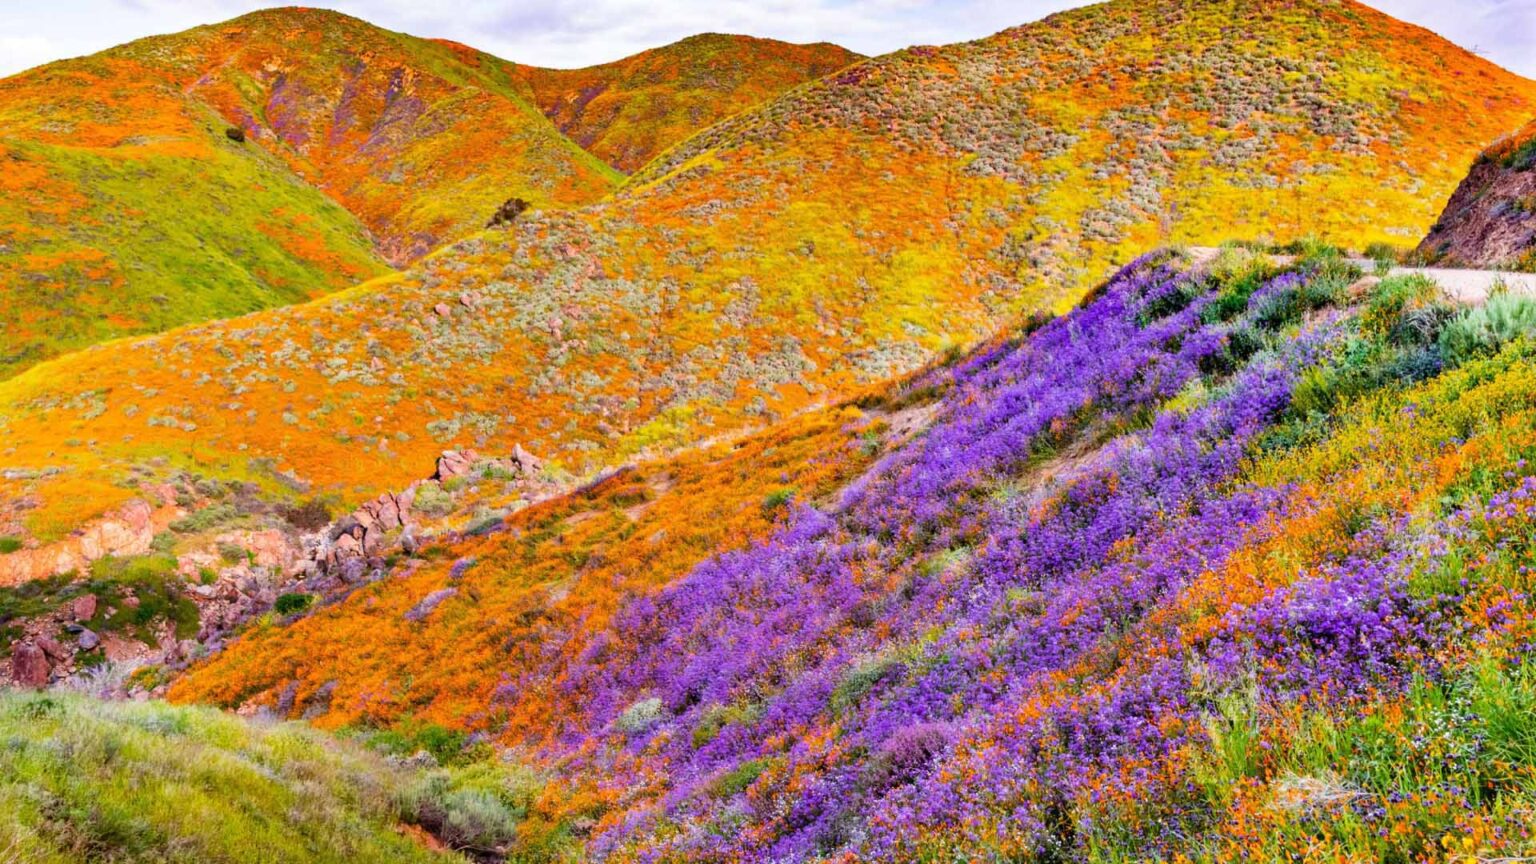 A Massive California Superbloom is Underway TOMORROW’S WORLD TODAY®